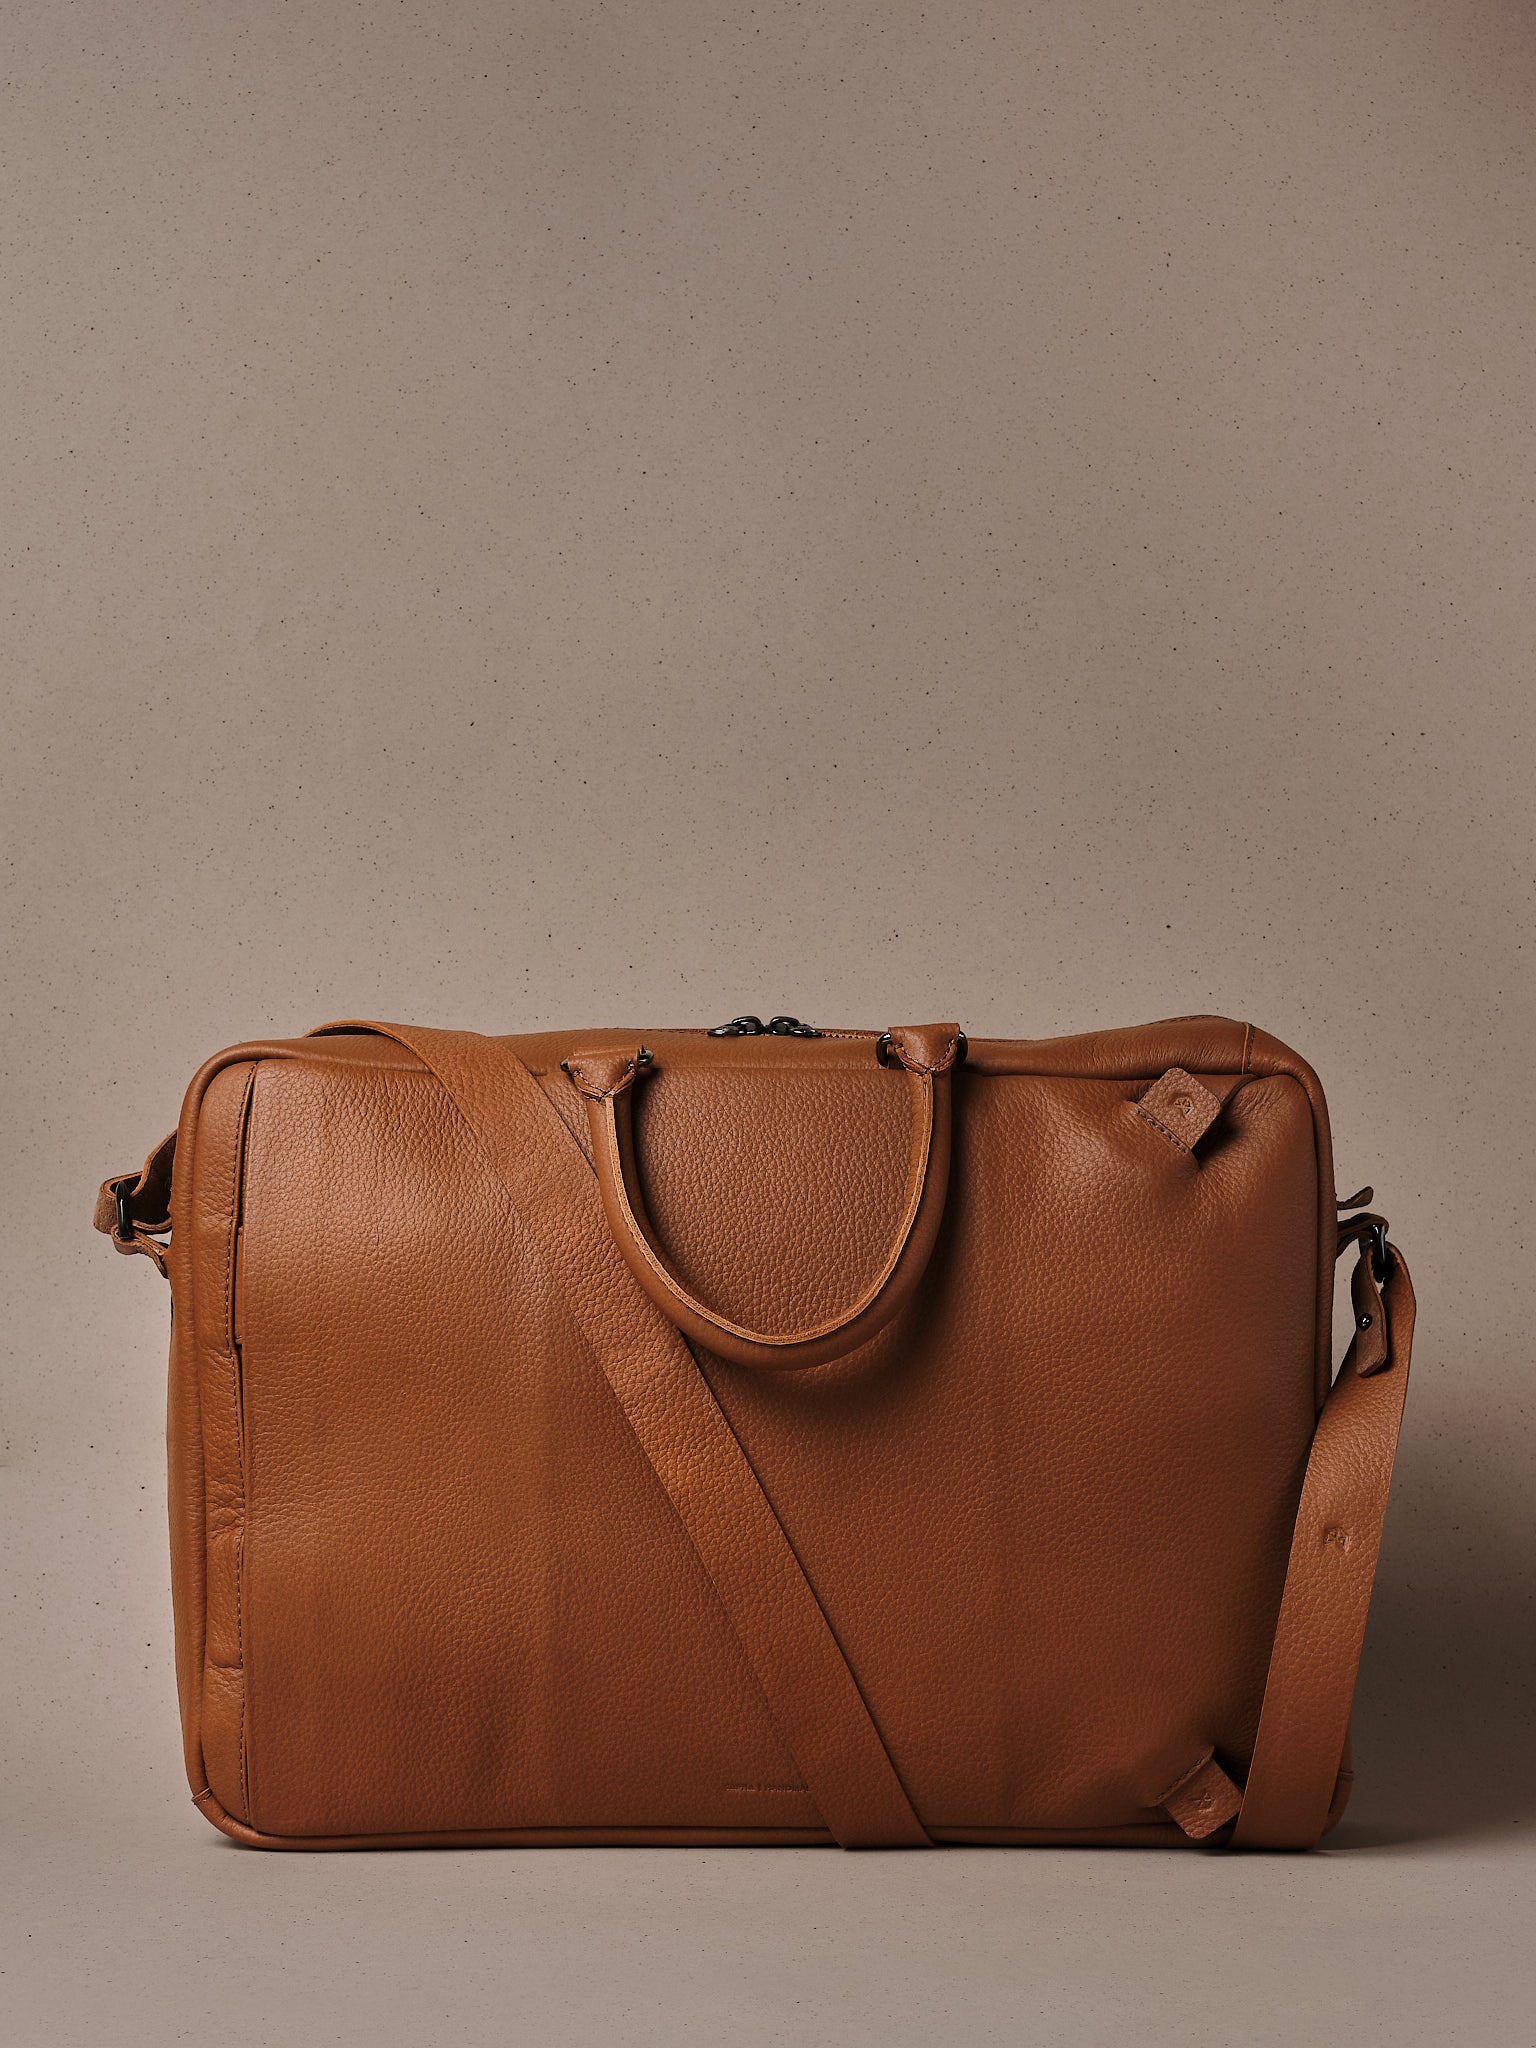 Handmade Leather Briefcase. Backpack Briefcase Combo Tan by Capra Leather